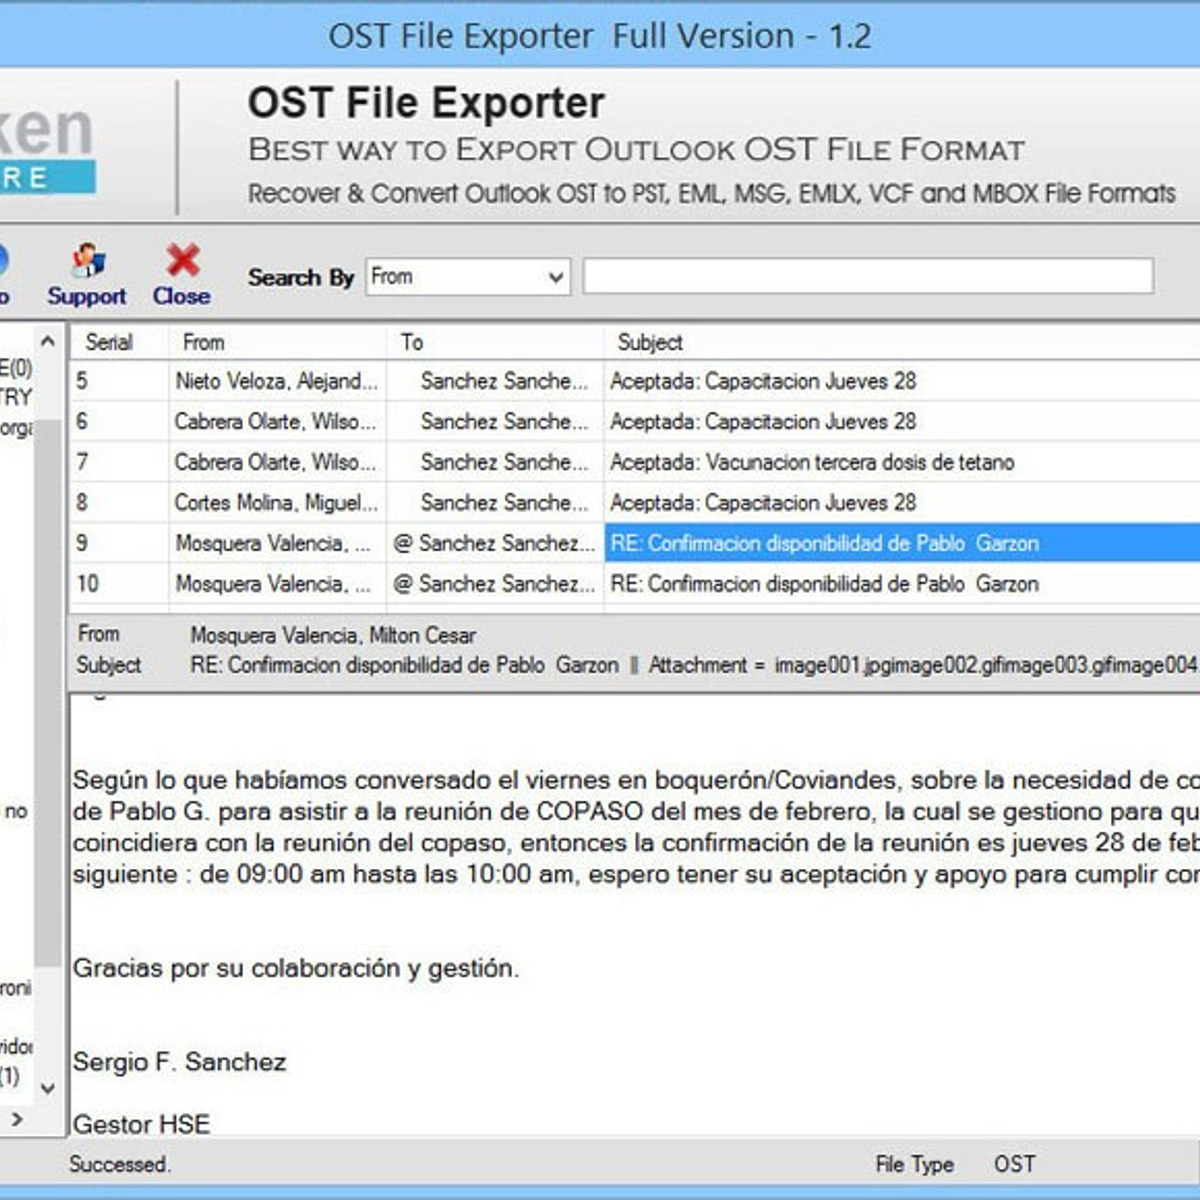 Torrents Ost To Pst Converter